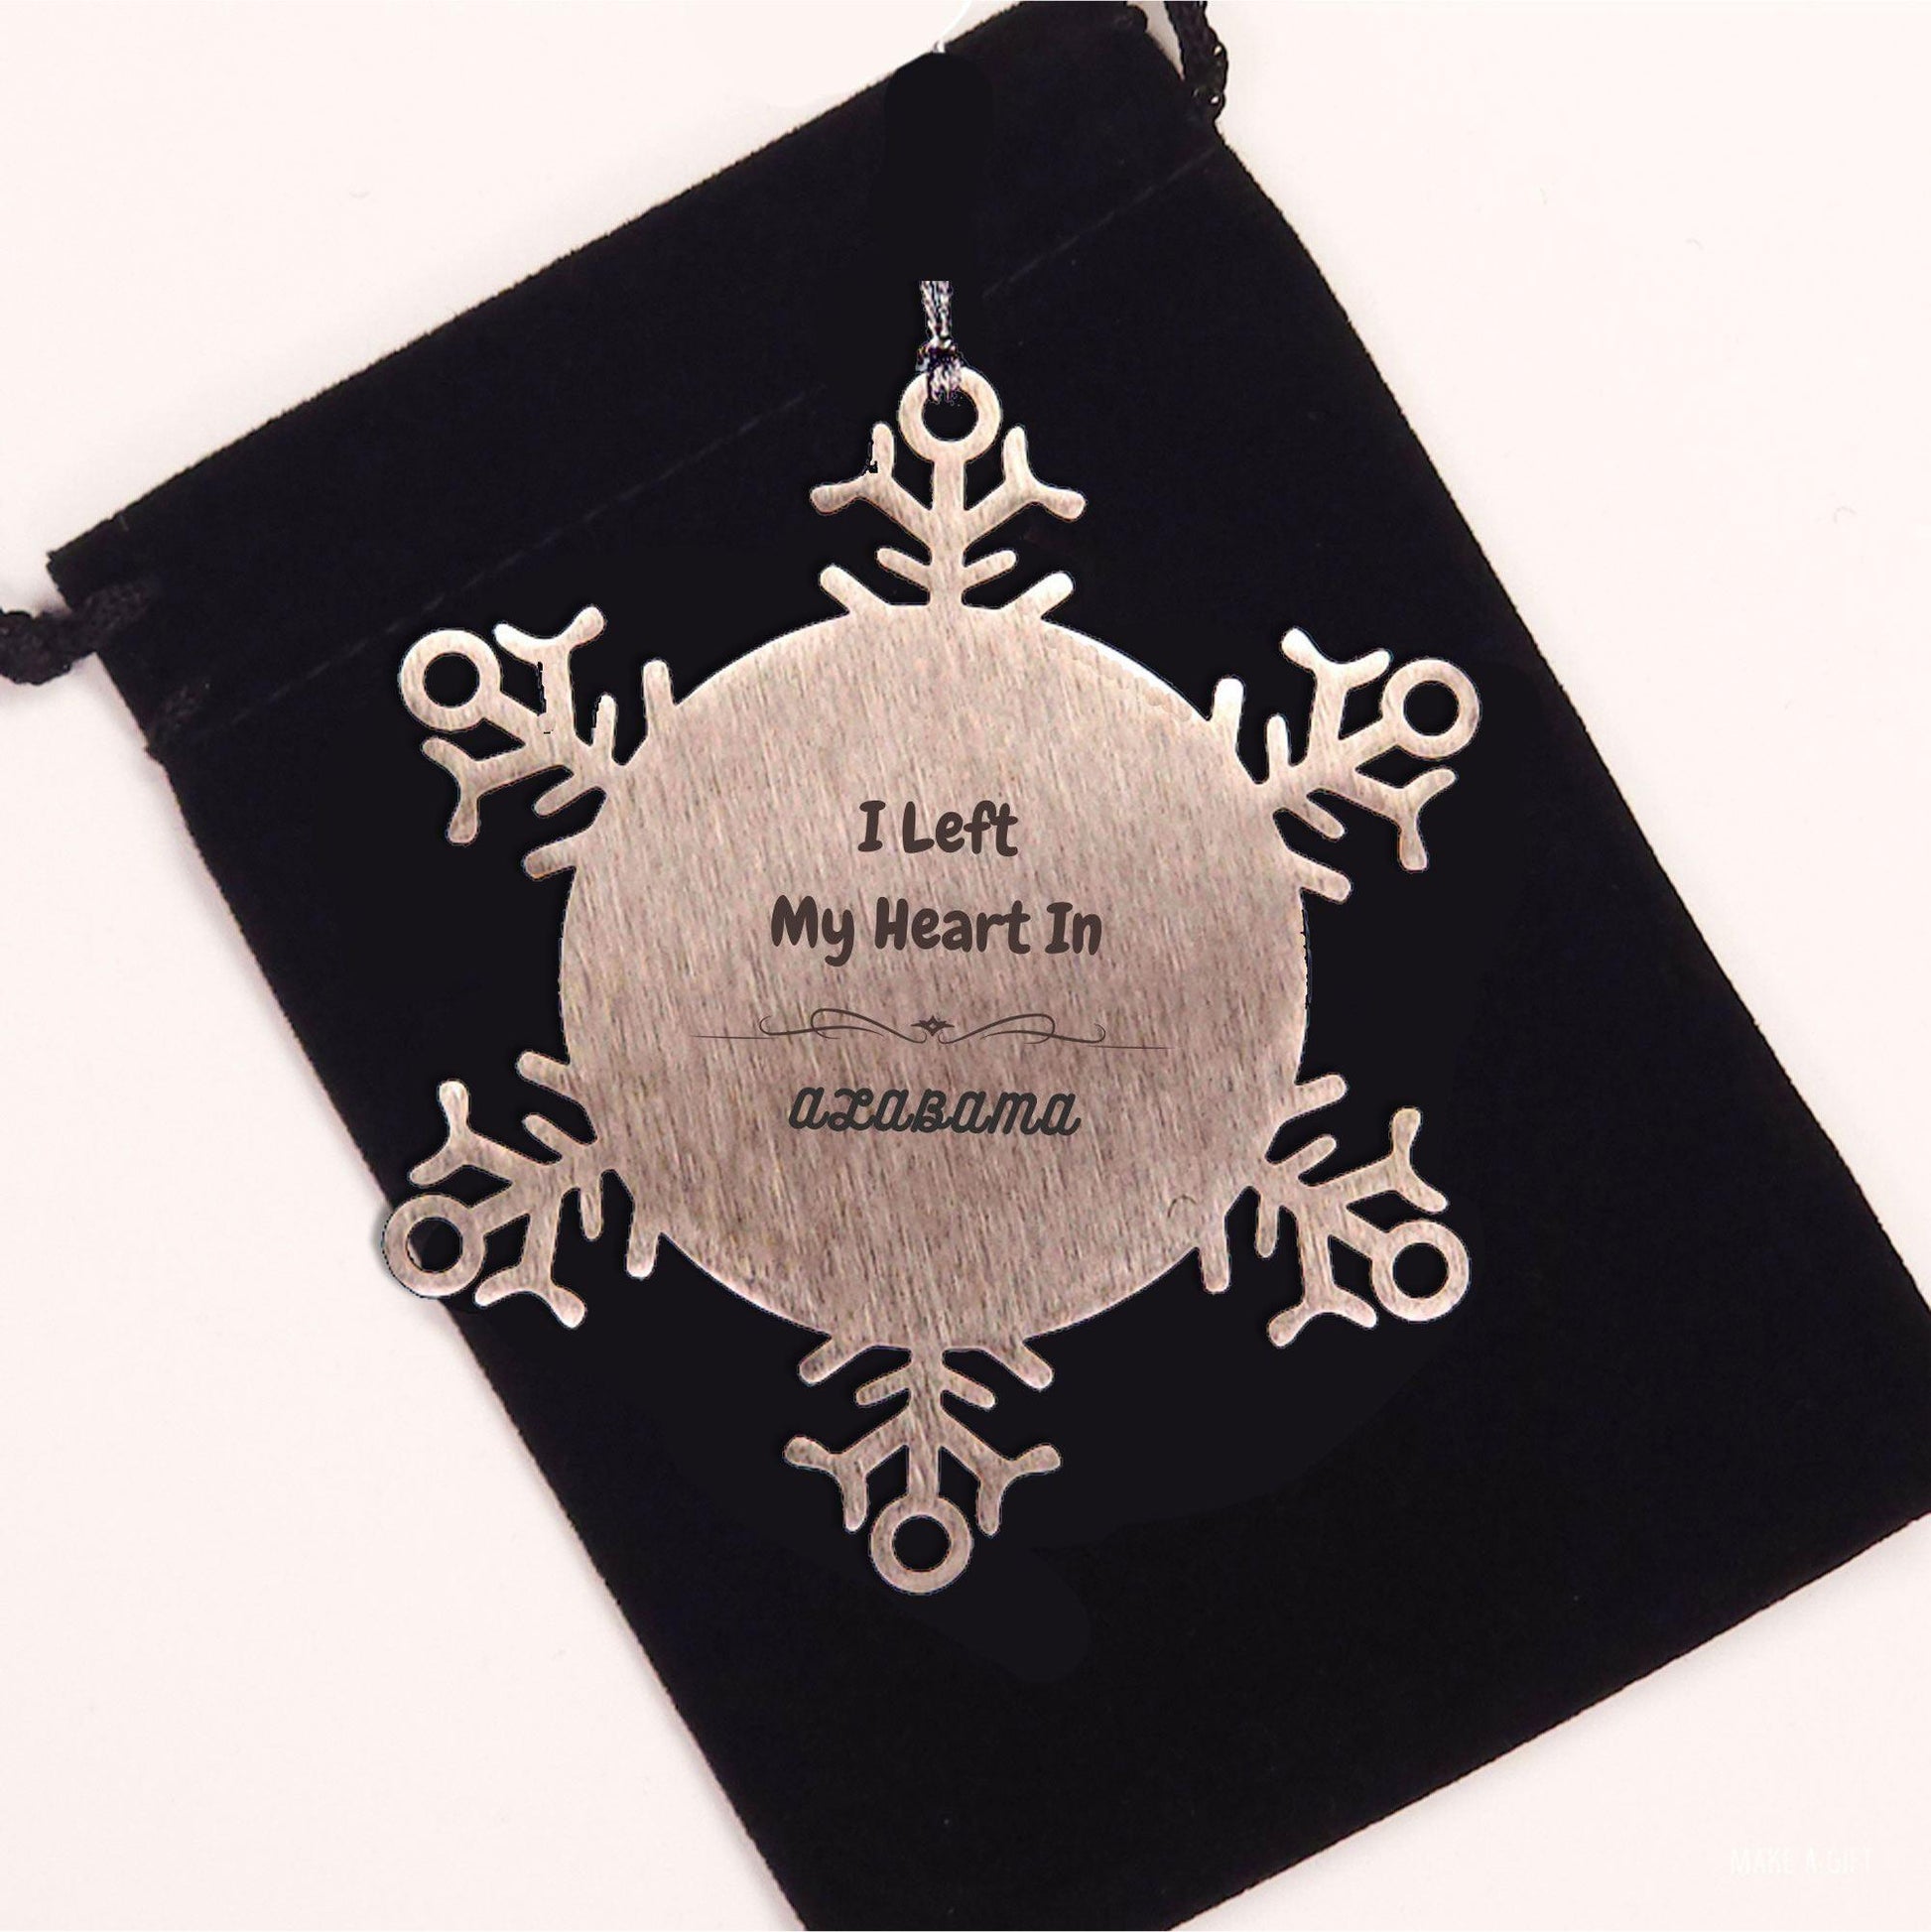 I Left My Heart In Alabama Gifts, Meaningful Alabama State for Friends, Men, Women. Snowflake Ornament for Alabama People - Mallard Moon Gift Shop